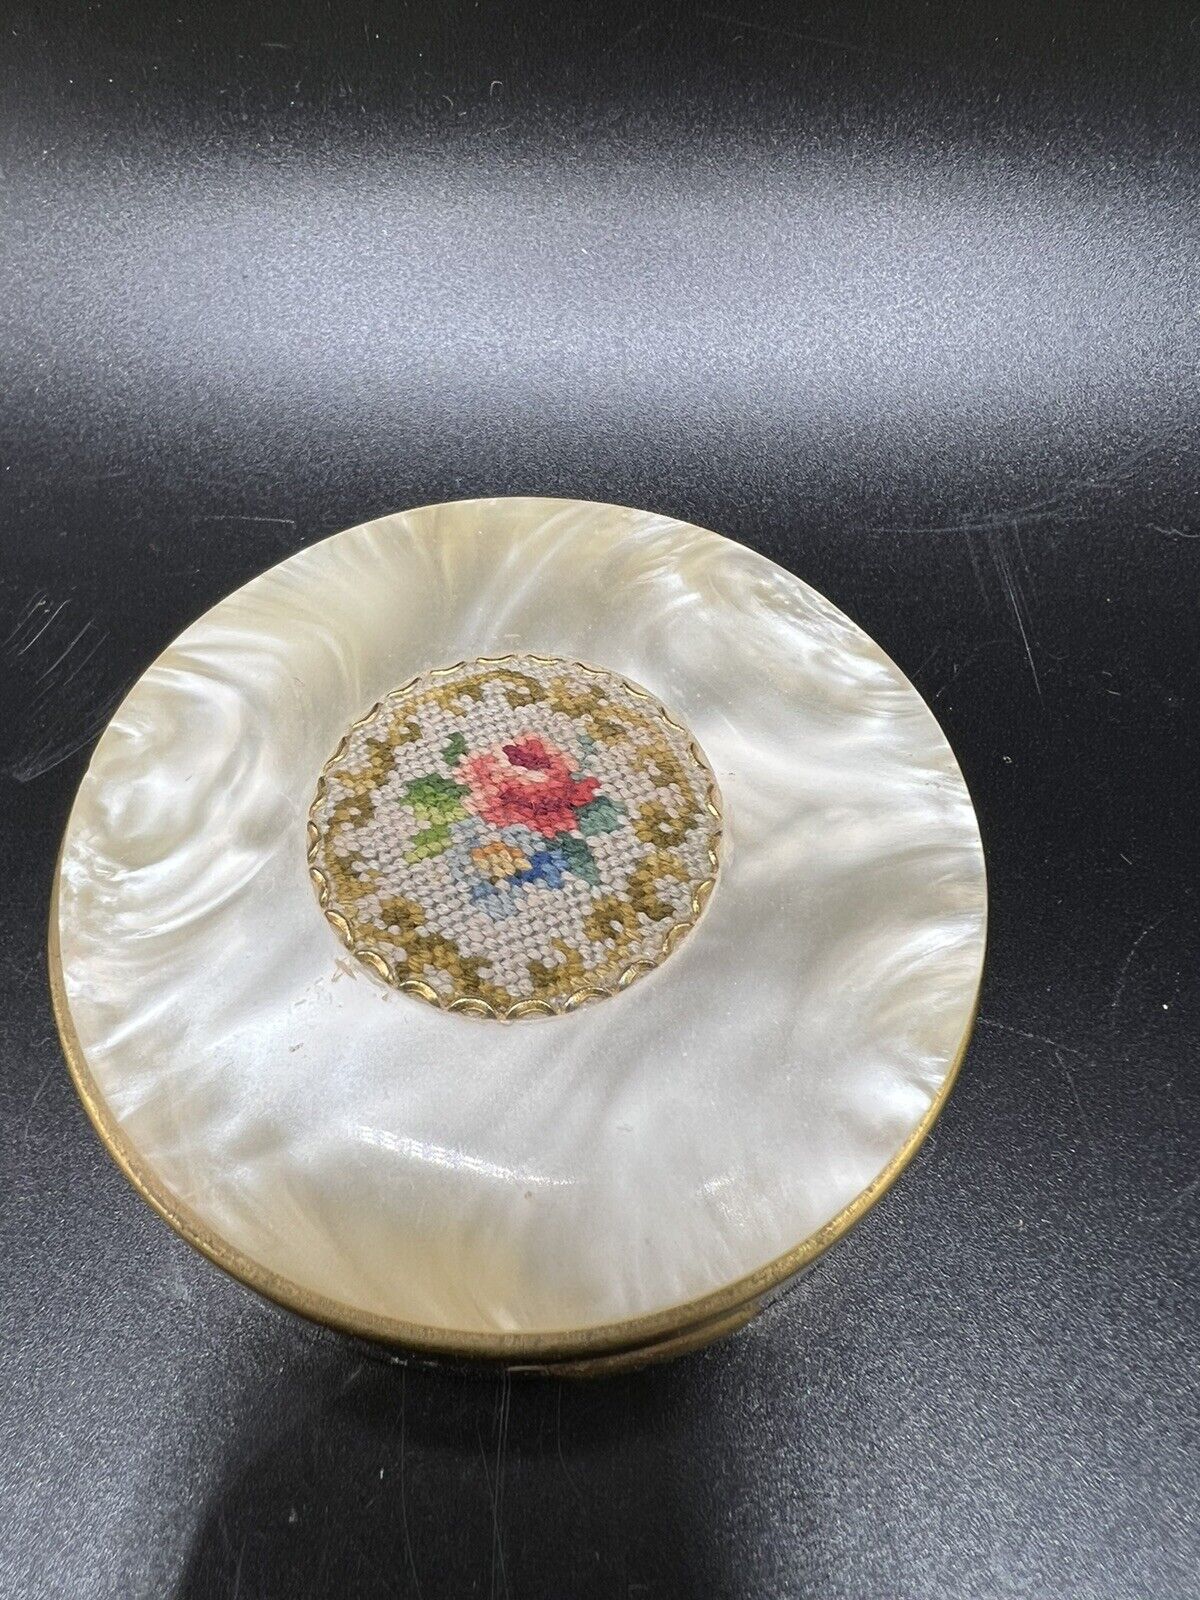 ANTIQUE VINTAGE MOTHER OF PEARL EMBROIDERY POWDER Flower Rose 3” EUC